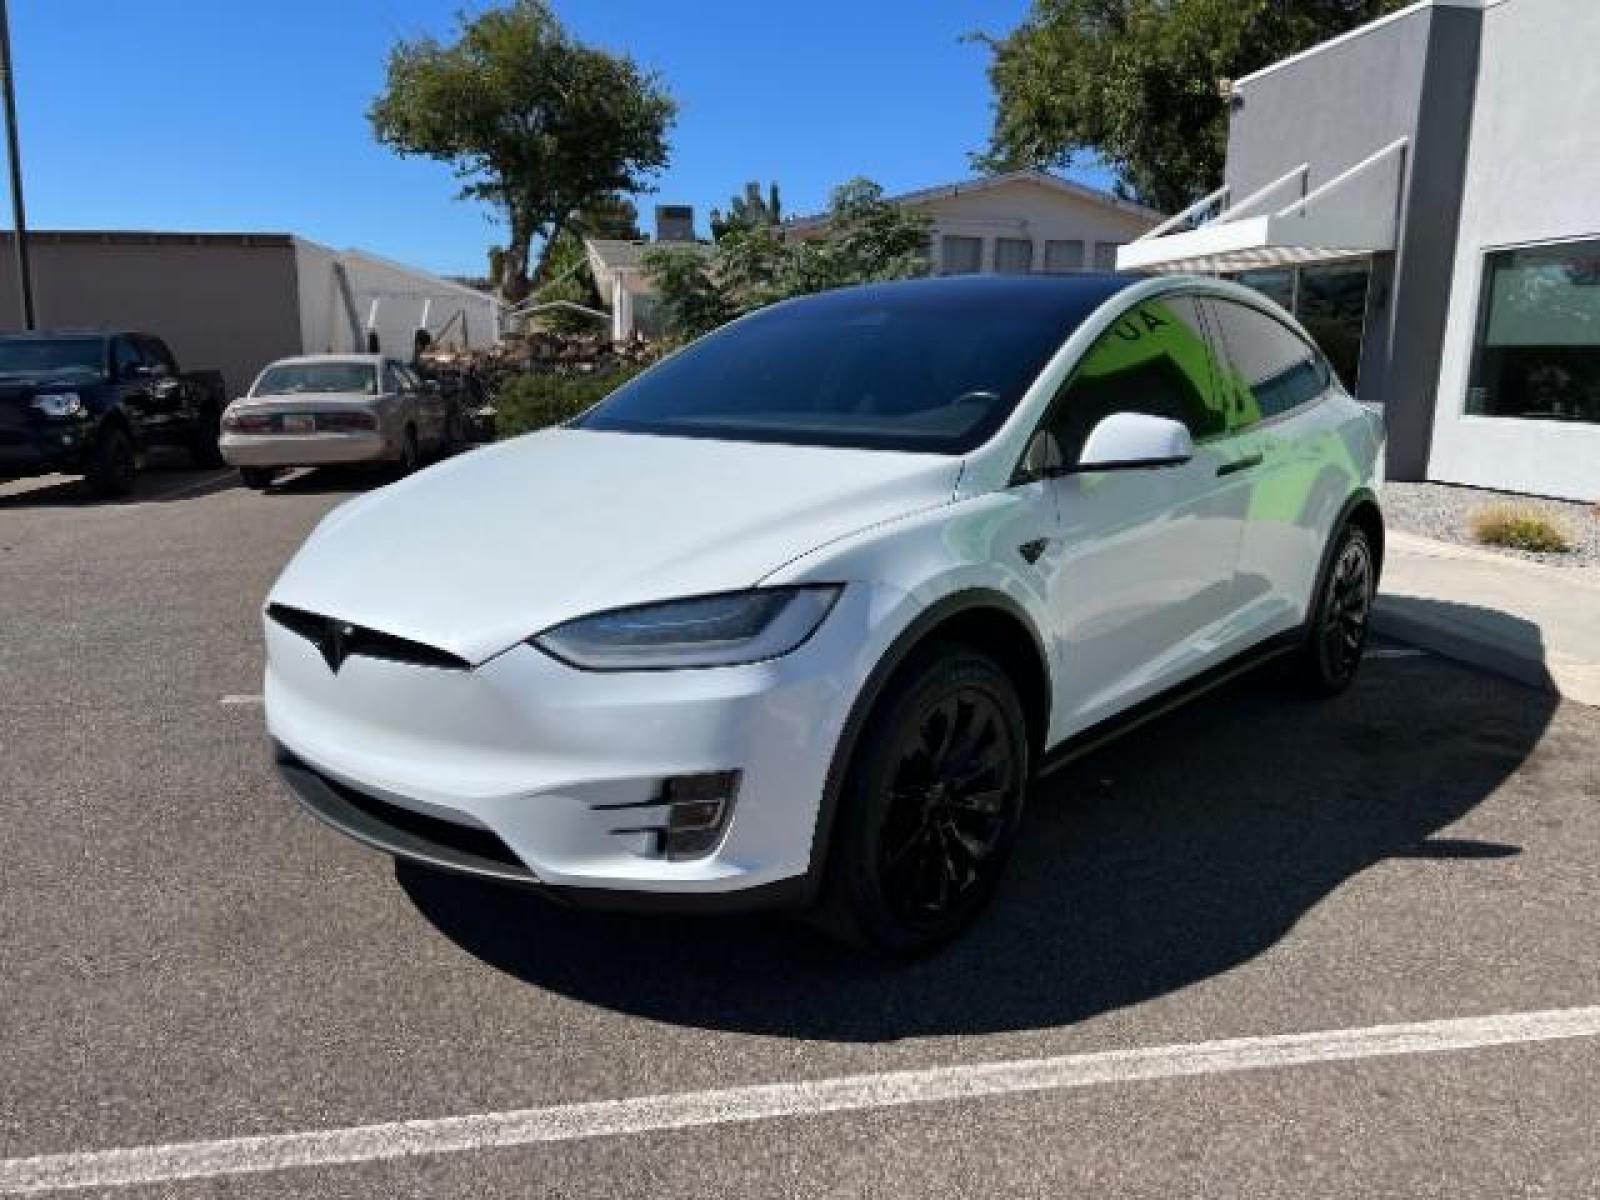 2019 Pearl White Multi-Coat /All Black, leatherette Tesla Model X Standard Range (5YJXCAE21KF) with an ELECTRIC engine, 1-Speed Automatic transmission, located at 1865 East Red Hills Pkwy, St. George, 84770, (435) 628-0023, 37.120850, -113.543640 - AWD, 7 Seats, Autopilot, Raven, Cold weather package, Adaptive suspension, Tow hitch, 2 remotes, FSD computer 3.0 upgrade. Gets 270 miles on a full charge. Black chrome delete vinyl (removeable). This is a beautiful 1 owner MX for way less money and less waiting compared to ordering from Tesla. Bump - Photo #3